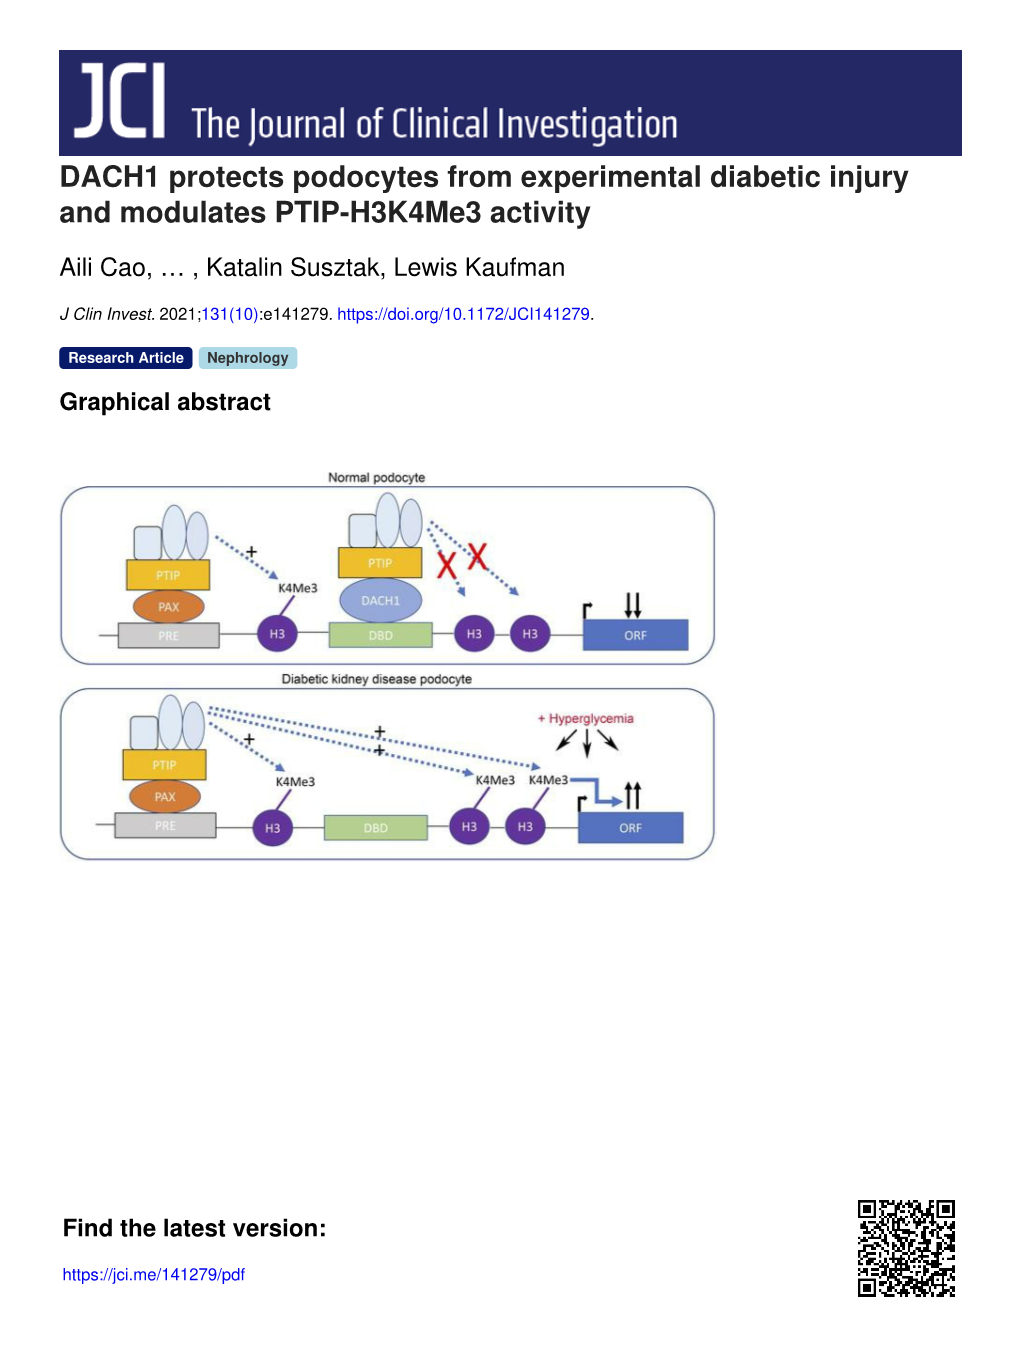 DACH1 Protects Podocytes from Experimental Diabetic Injury and Modulates PTIP-H3k4me3 Activity